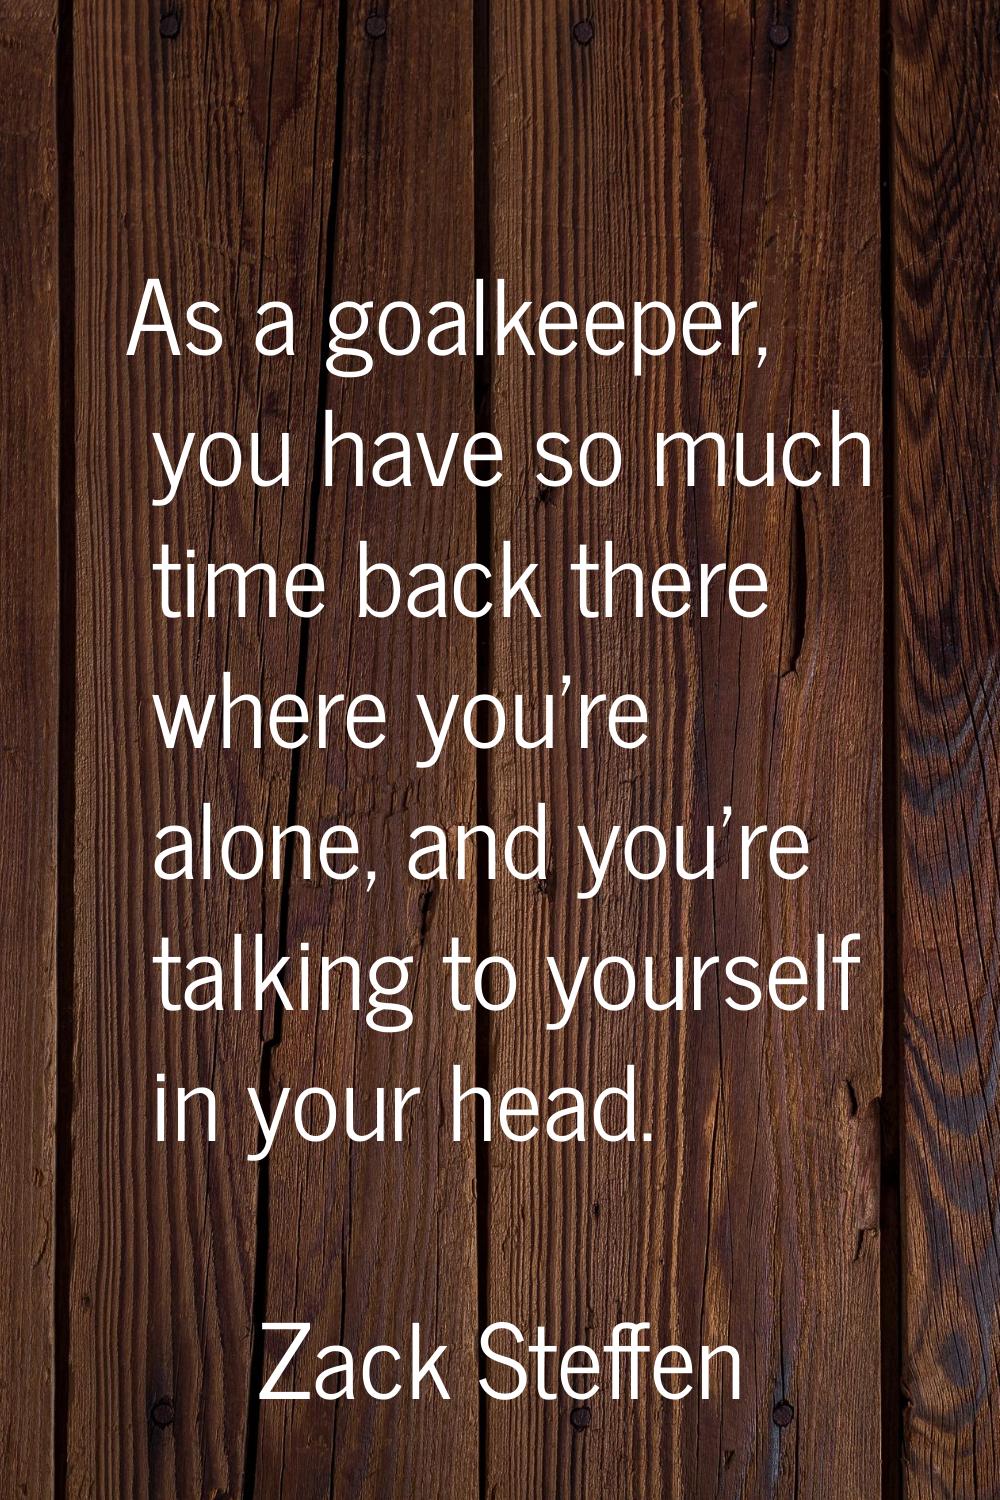 As a goalkeeper, you have so much time back there where you’re alone, and you’re talking to yoursel